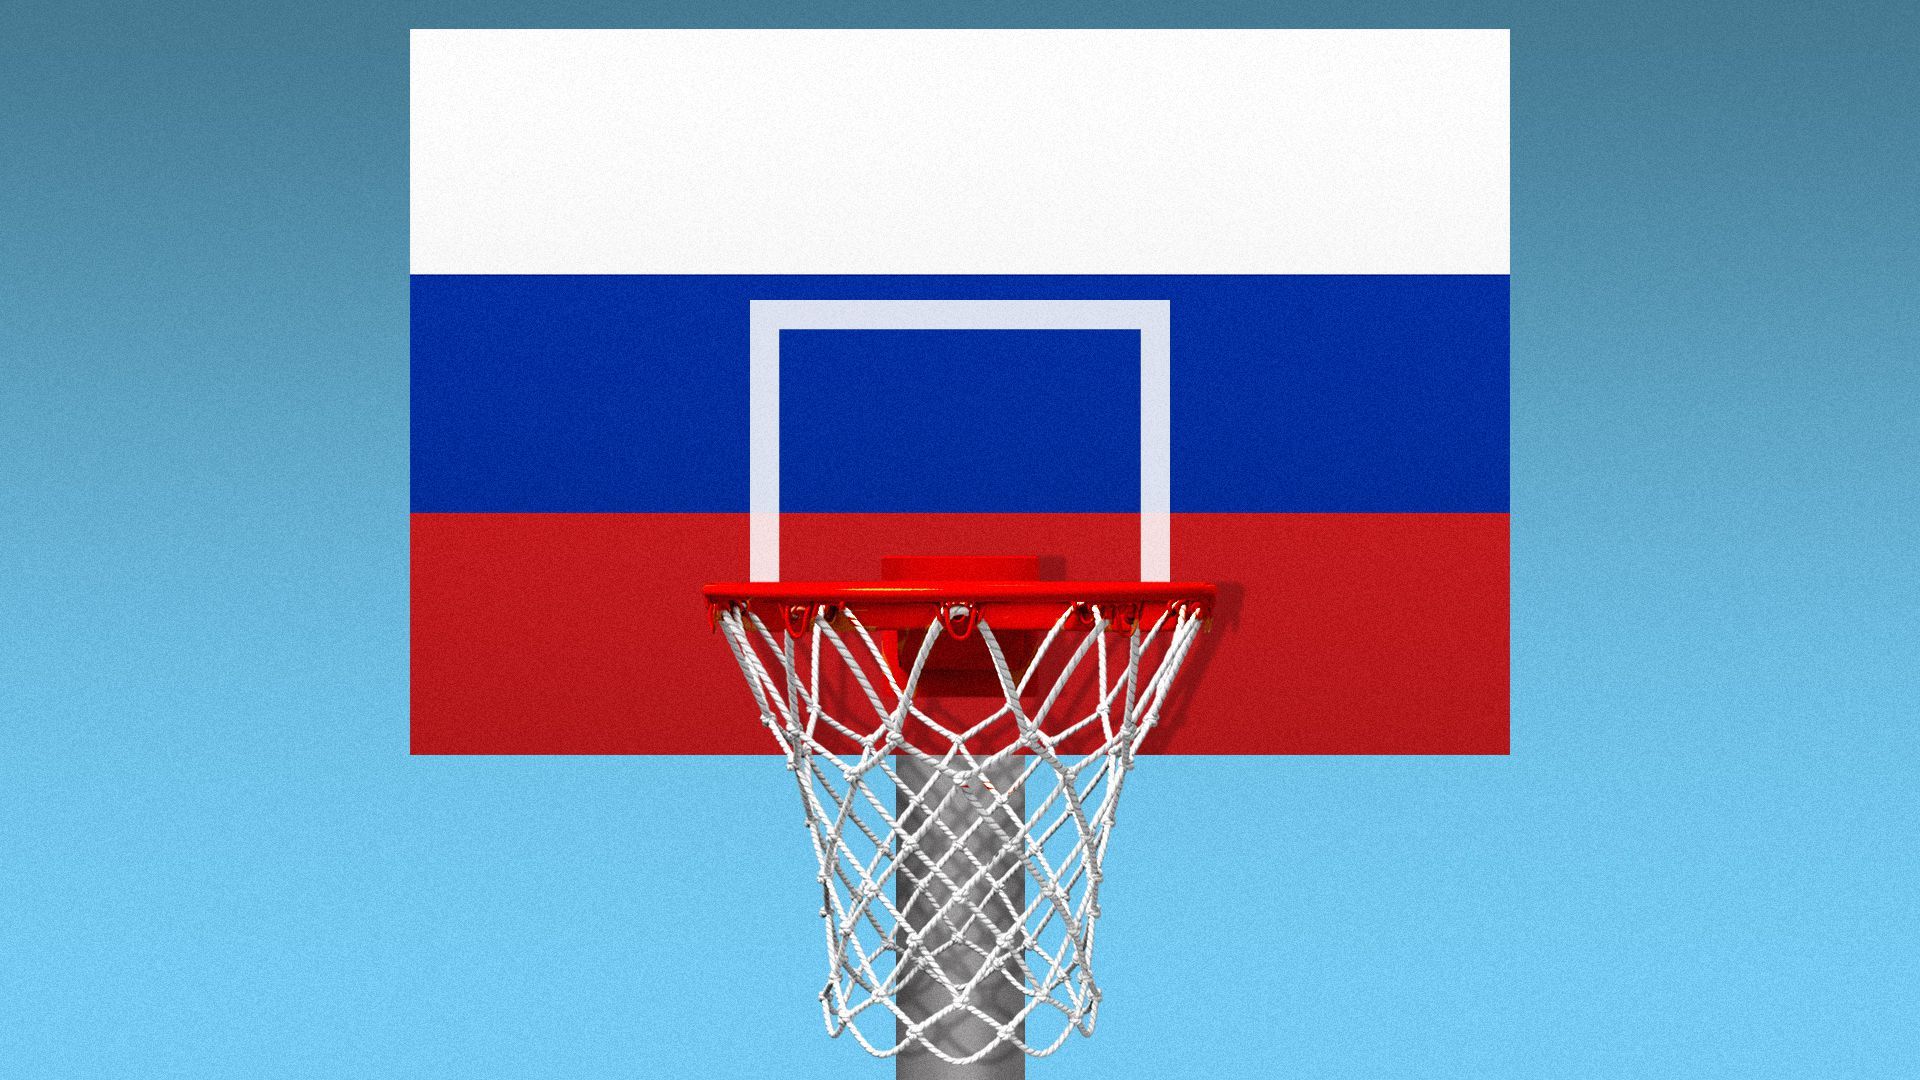 Illustration of a basketball hoop attached to a backboard made of the Russian flag.